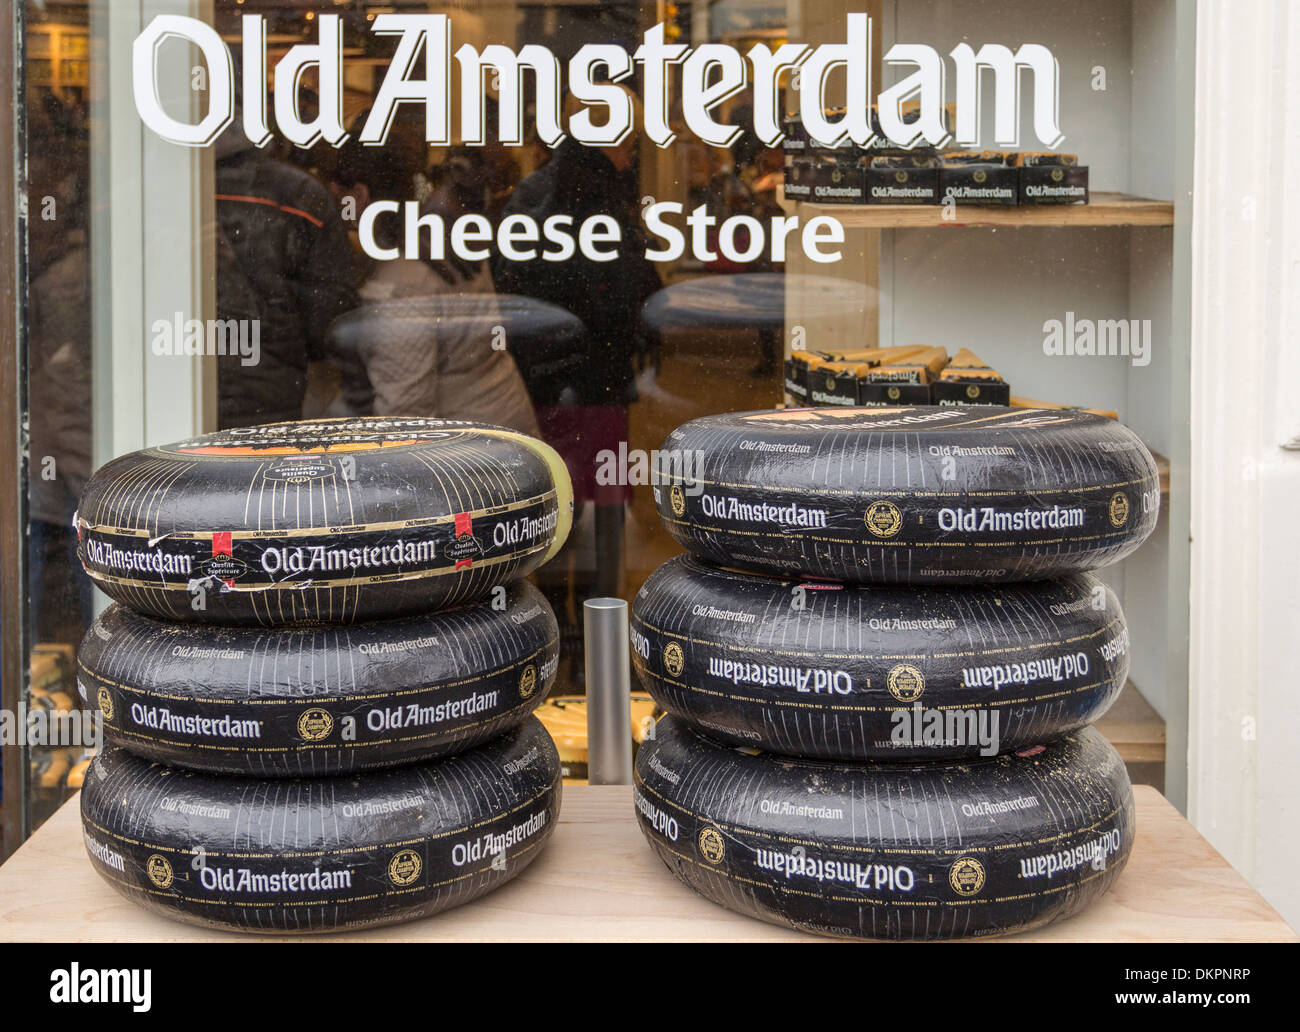 AMSTERDAM OLD AMSTERDAM CHEESE FOR SALE OUTSIDE A SHOP Stock Photo